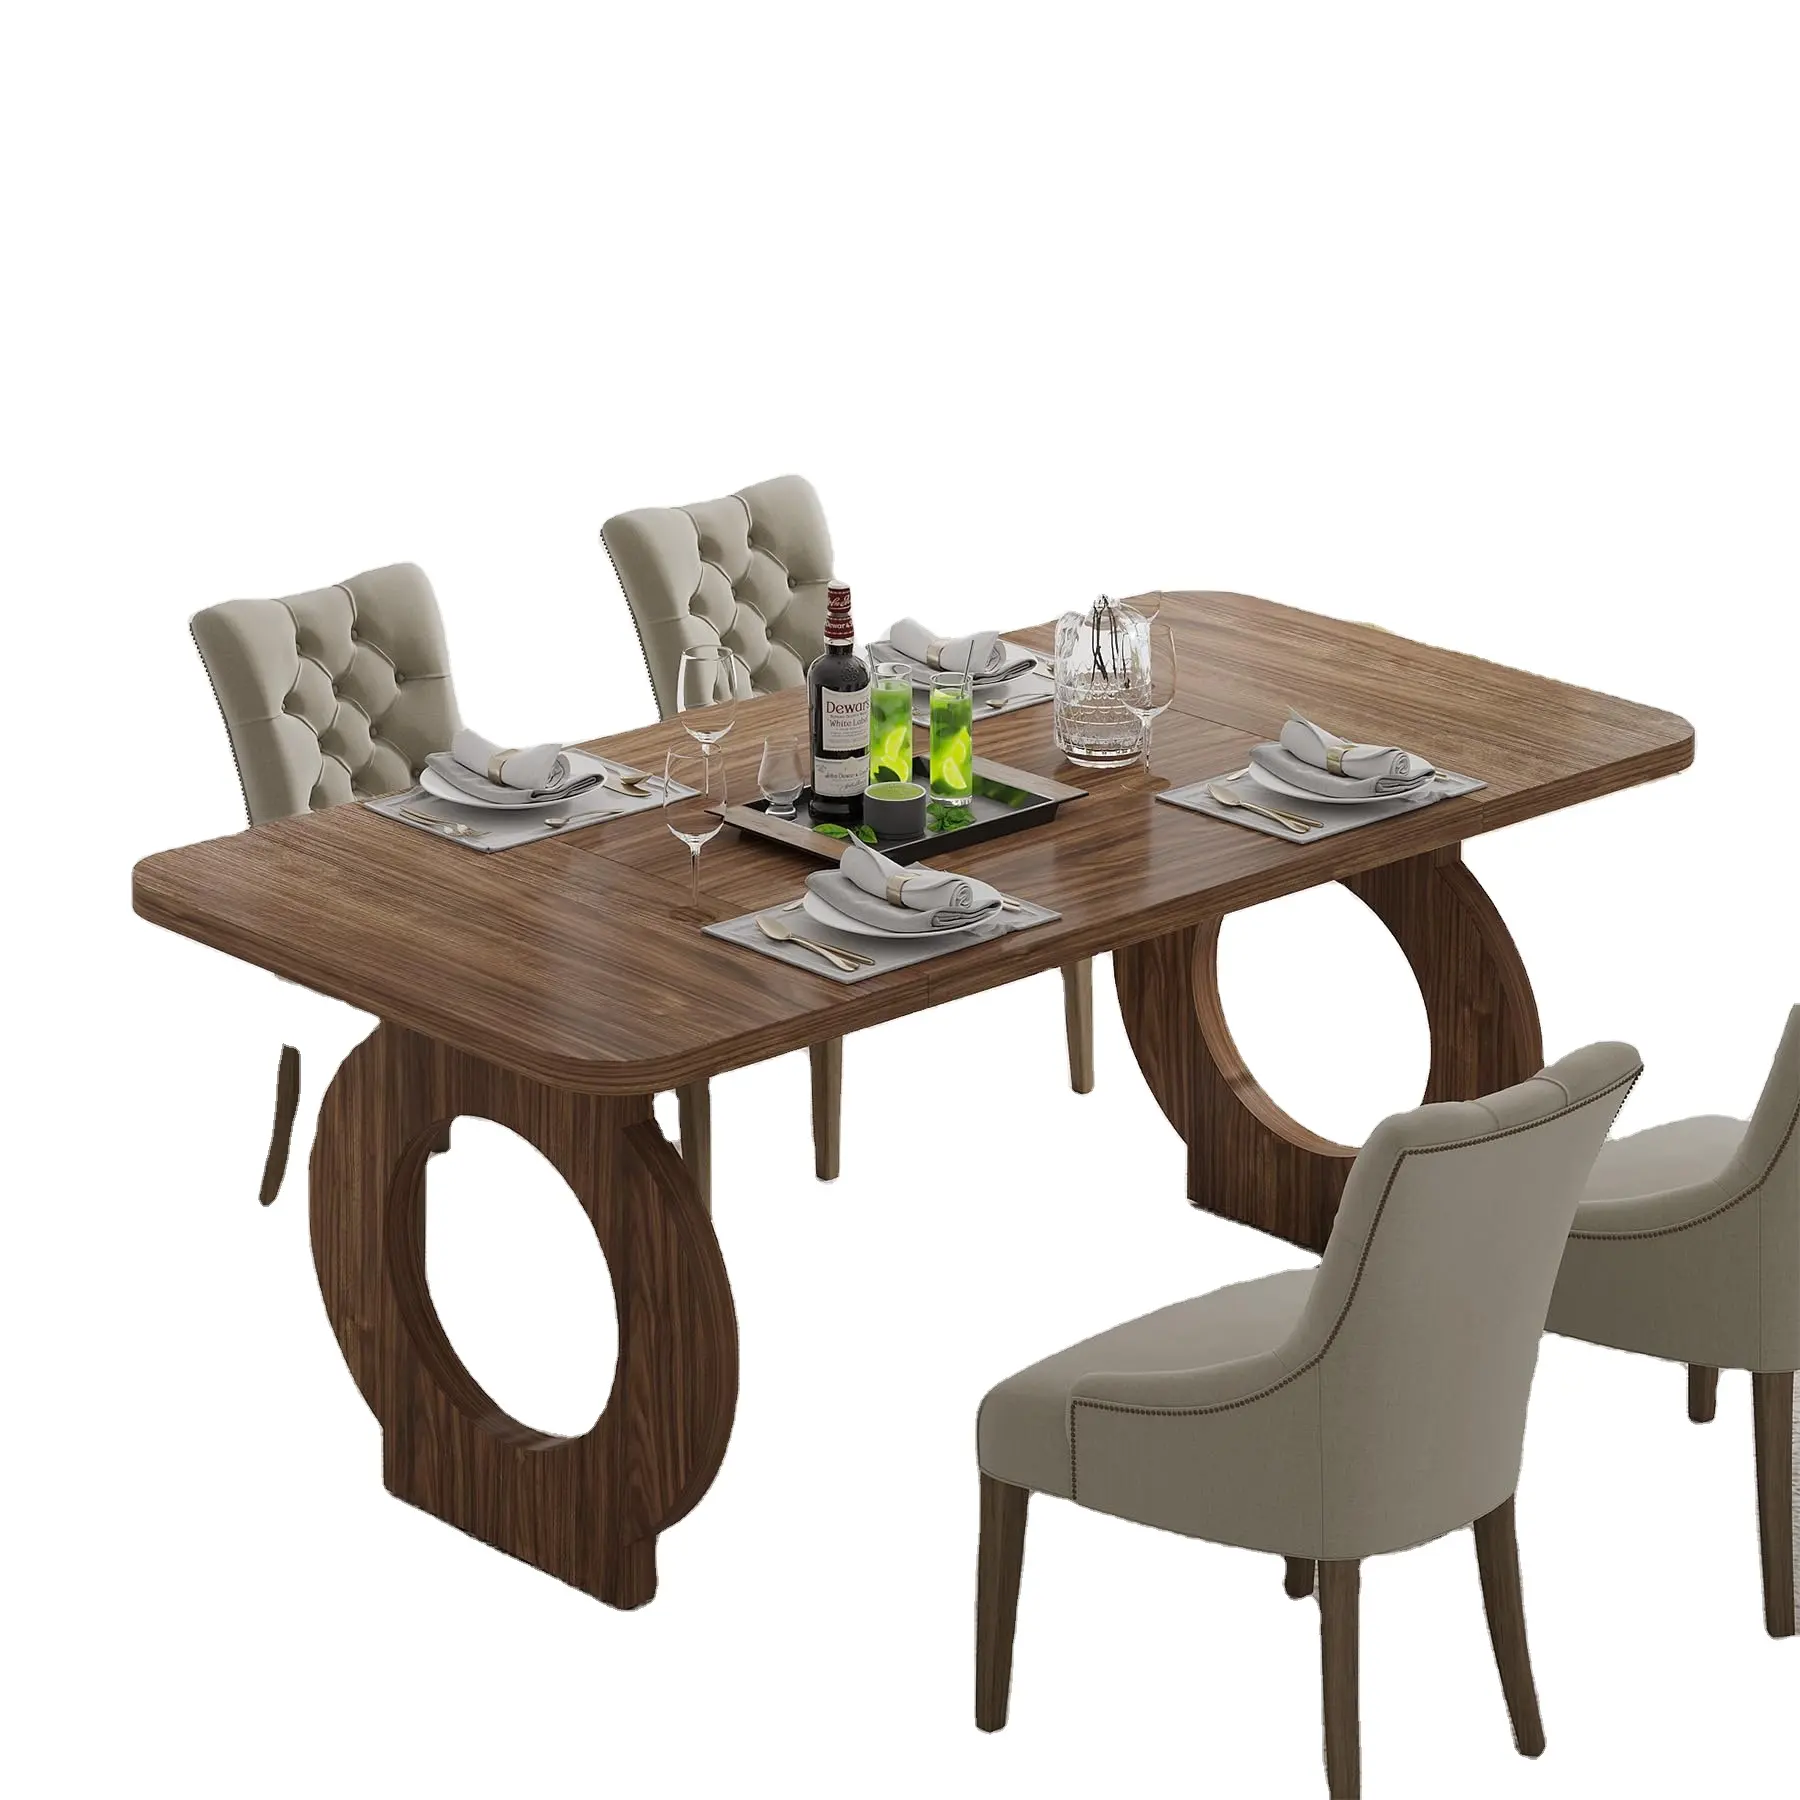 Wholesale Of New Materials Other Dining Room Furniture Dining Table Set 4 Chairs